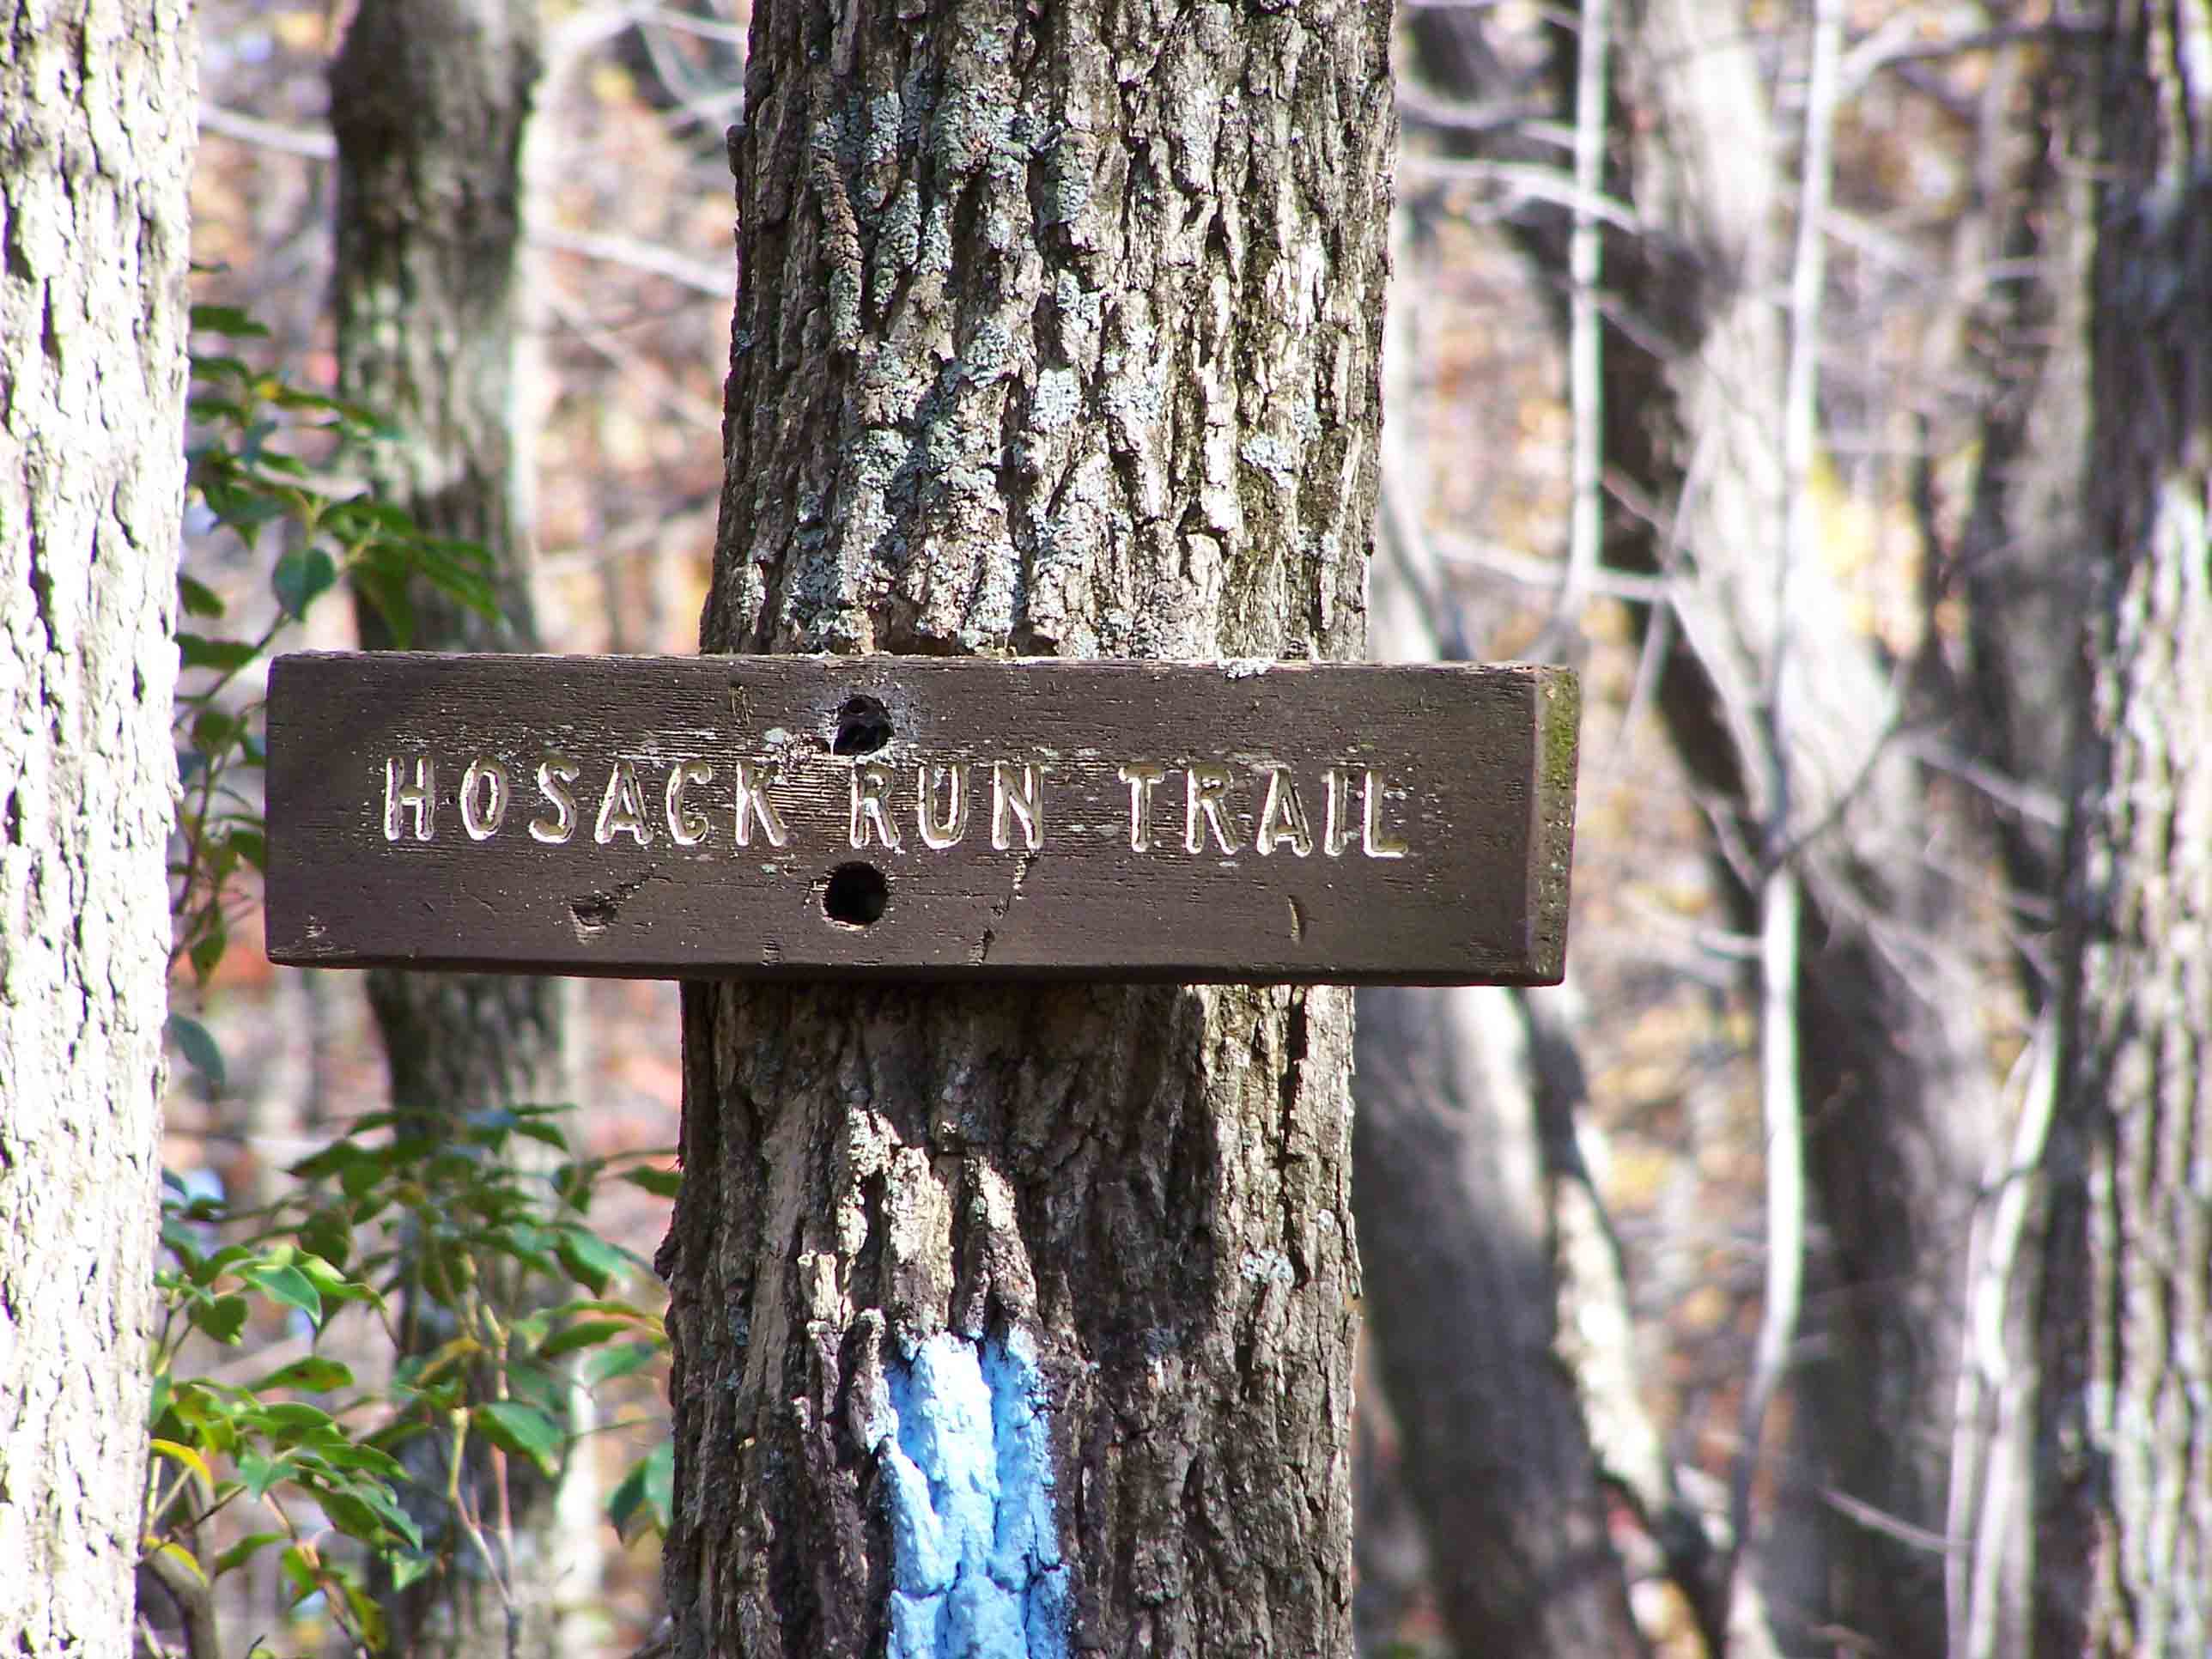 Hosack Run Trail mm 16.3. Courtesy at@rohland.org